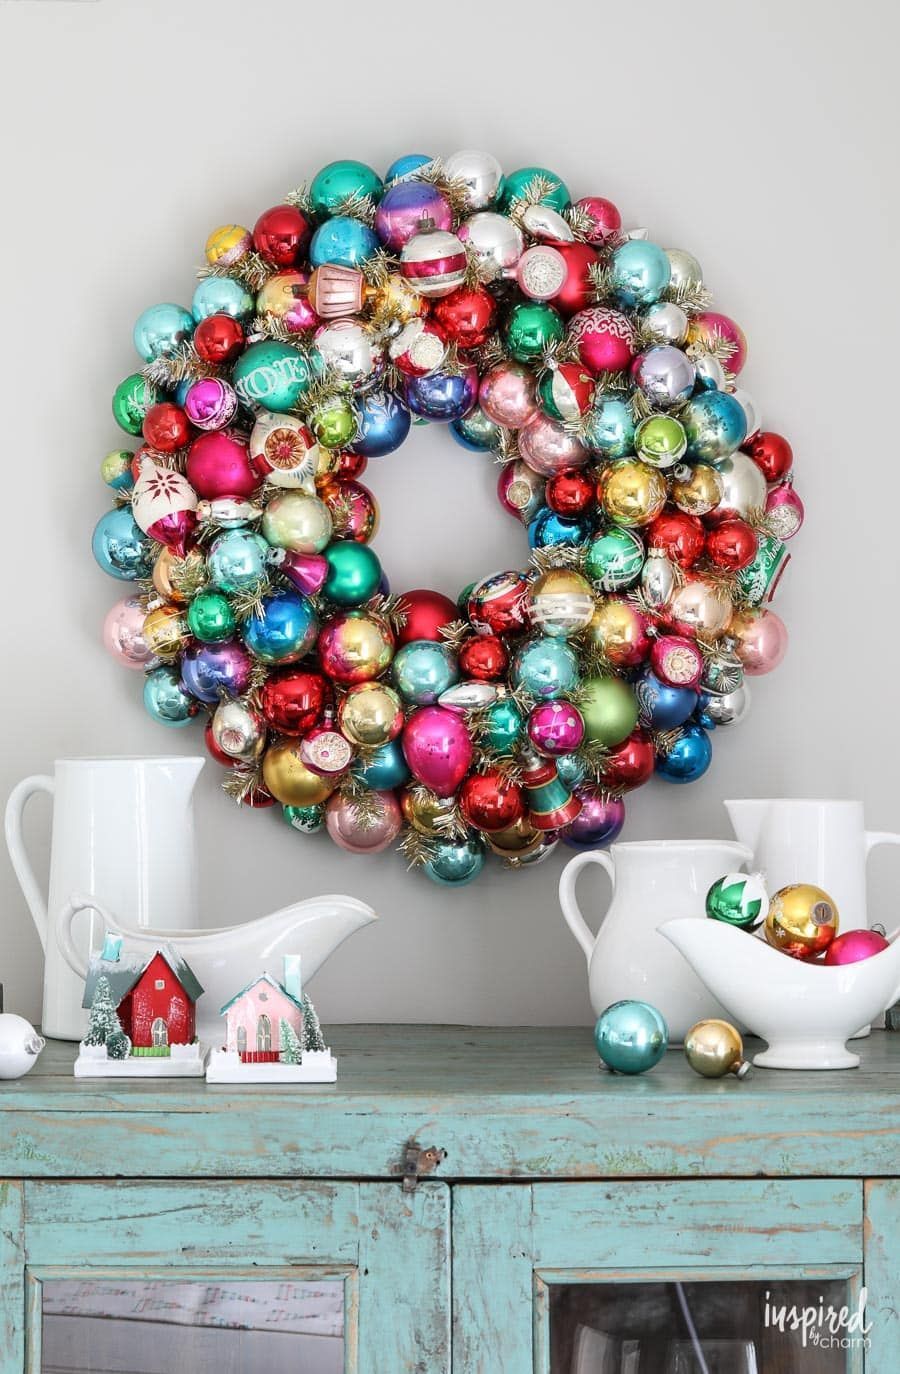 Top 99 retro christmas decor ideas for a vintage-inspired holiday look